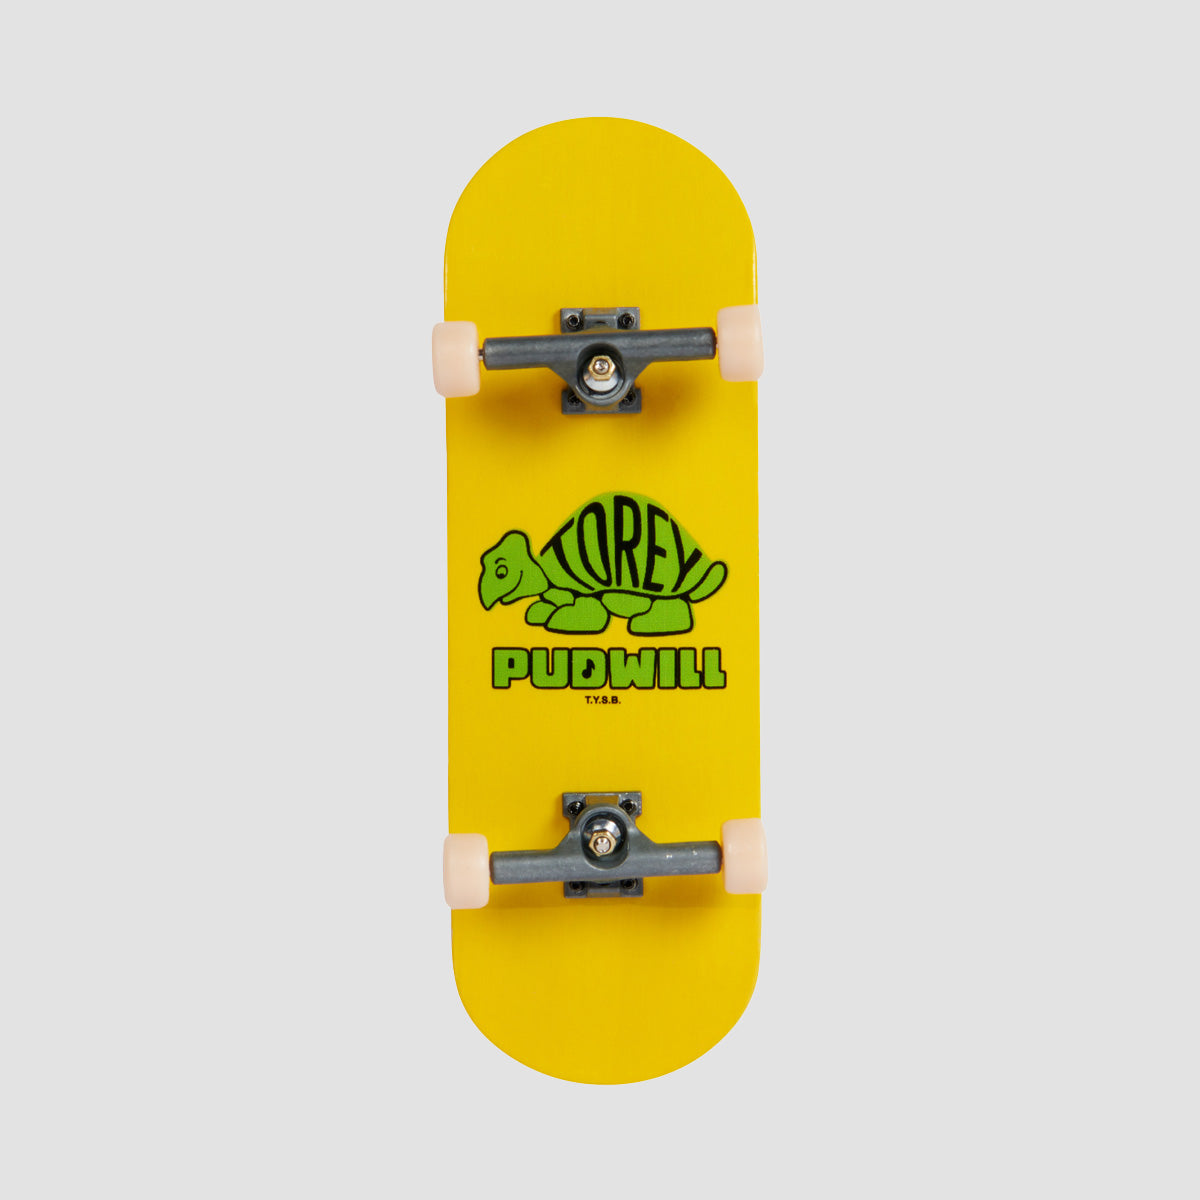 Tech Deck X Thank You Torey Pudwill Tortoise Wood Fingerboard - Performance Series